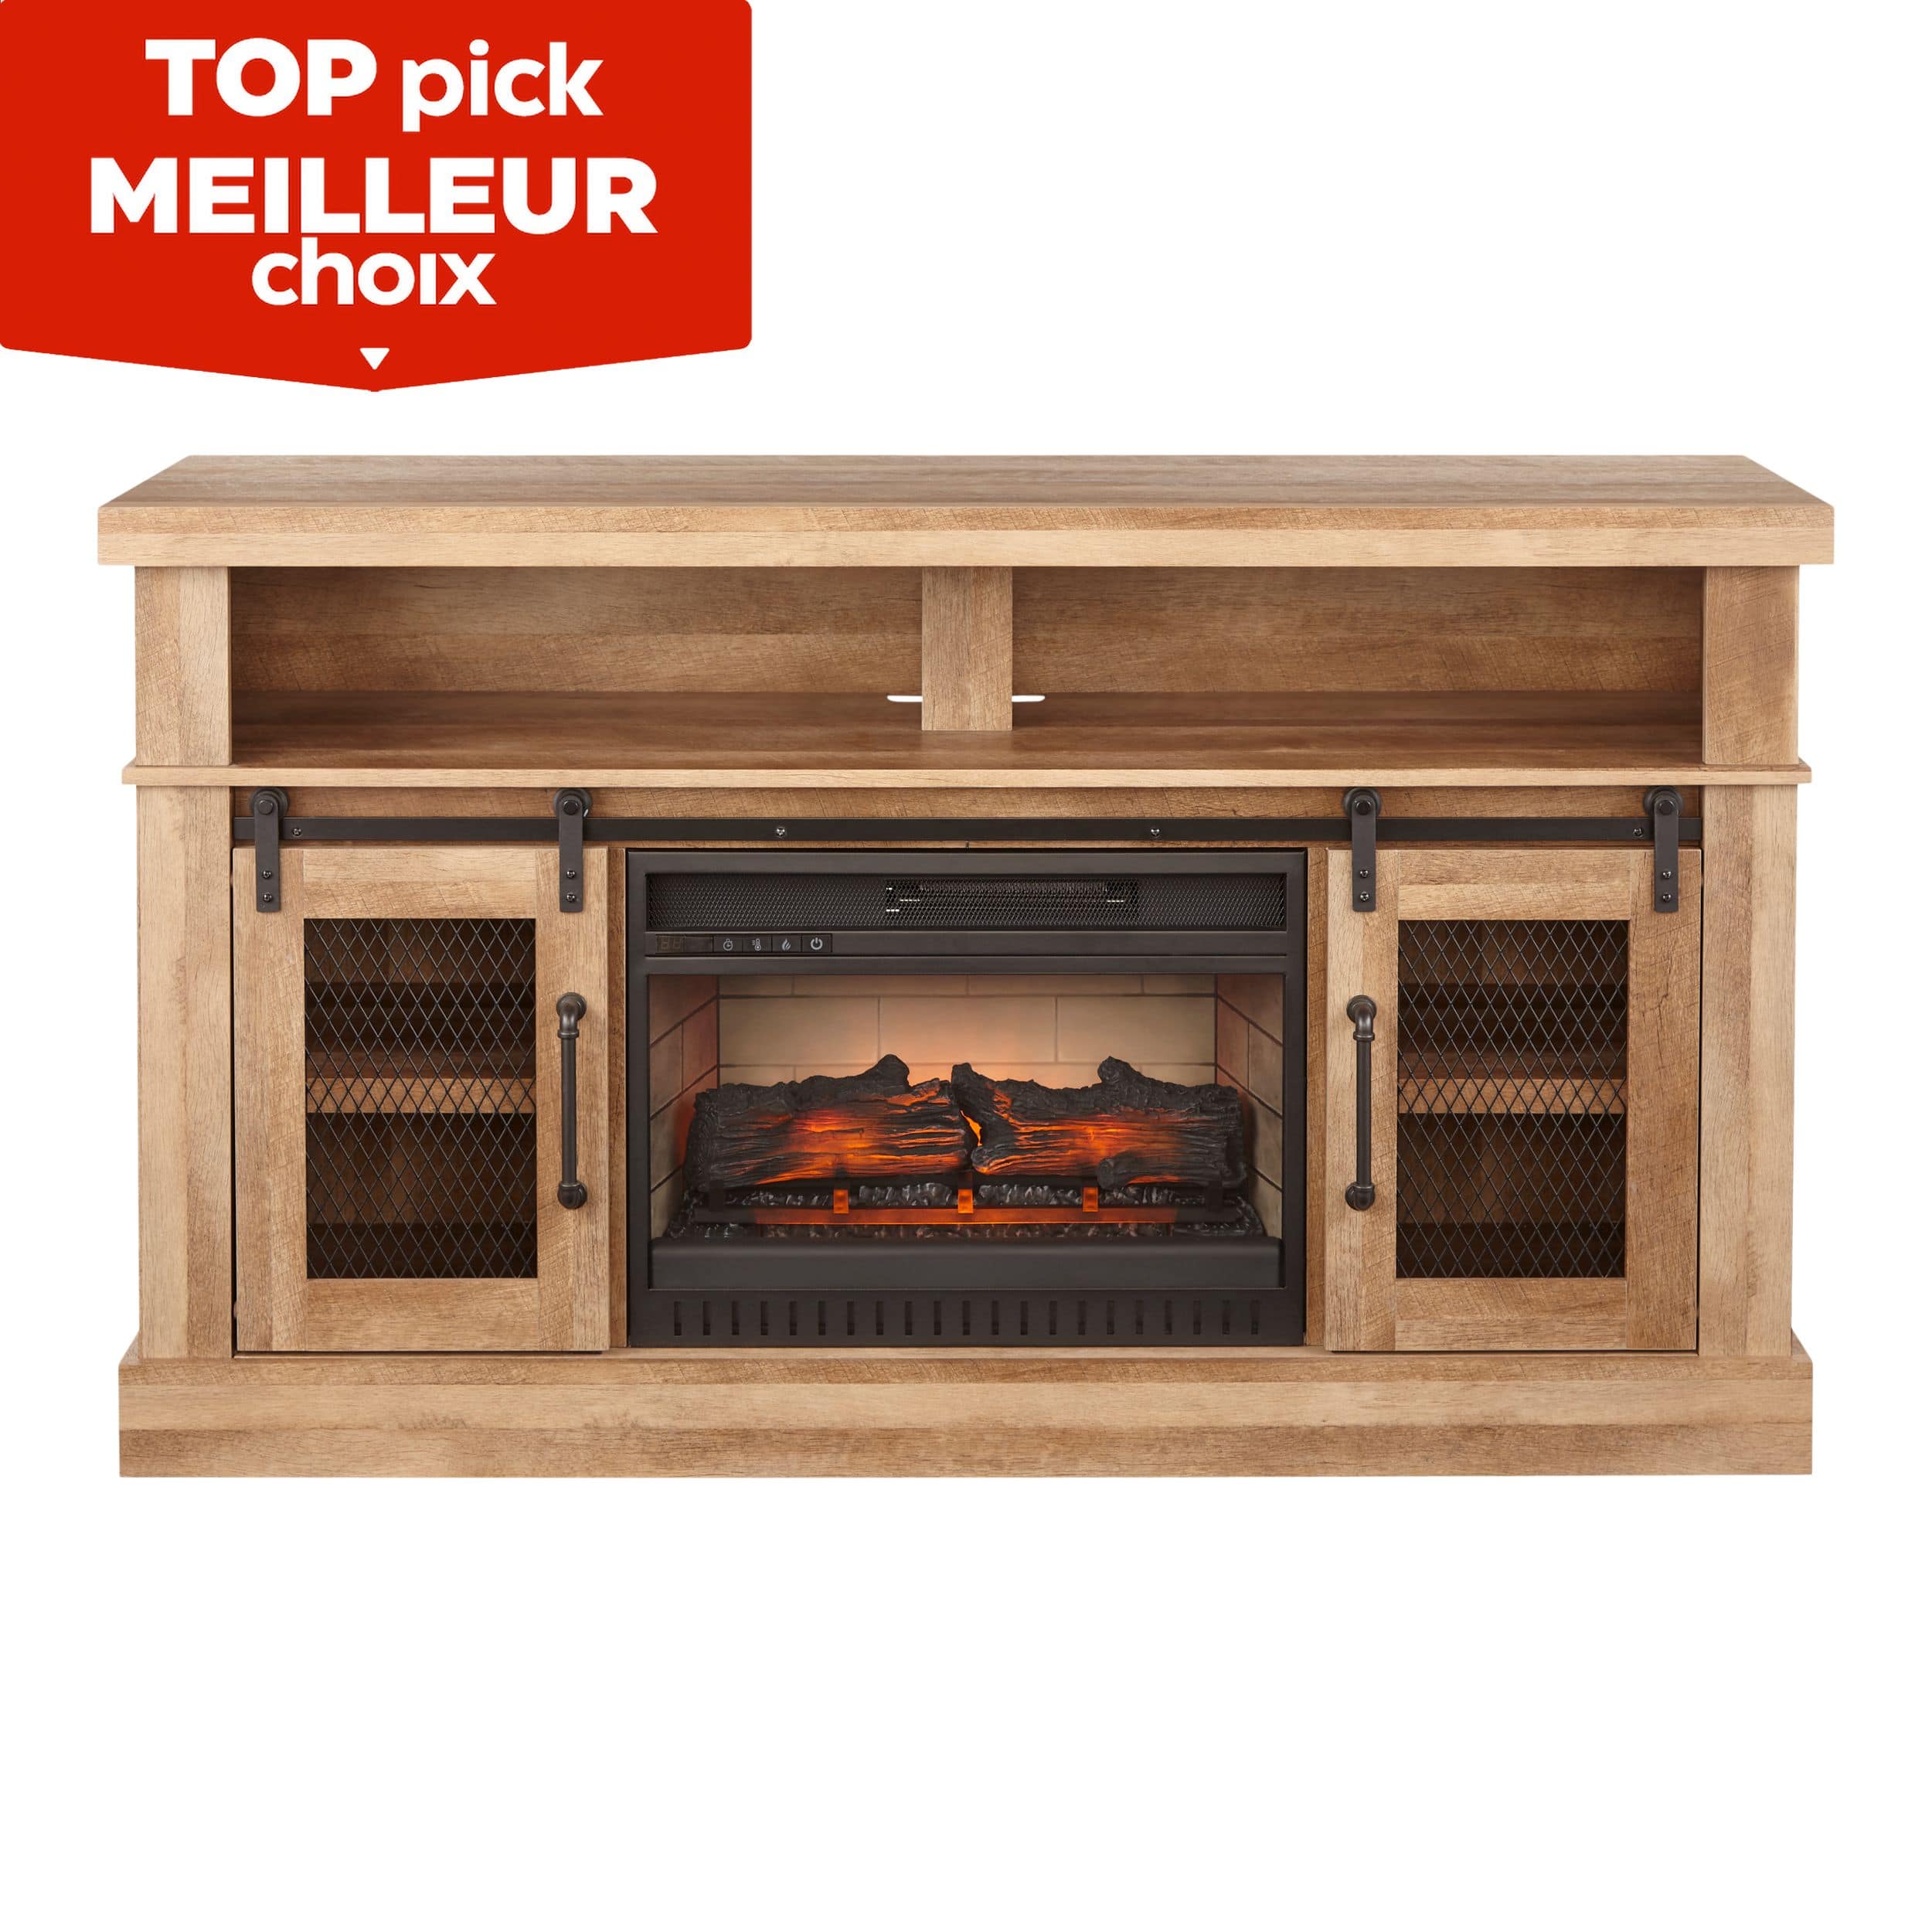 CANVAS Hanover Media Electric Fireplace TV Stand, 58-in, 1400W, Includes  Remote Control, Brown Canadian Tire